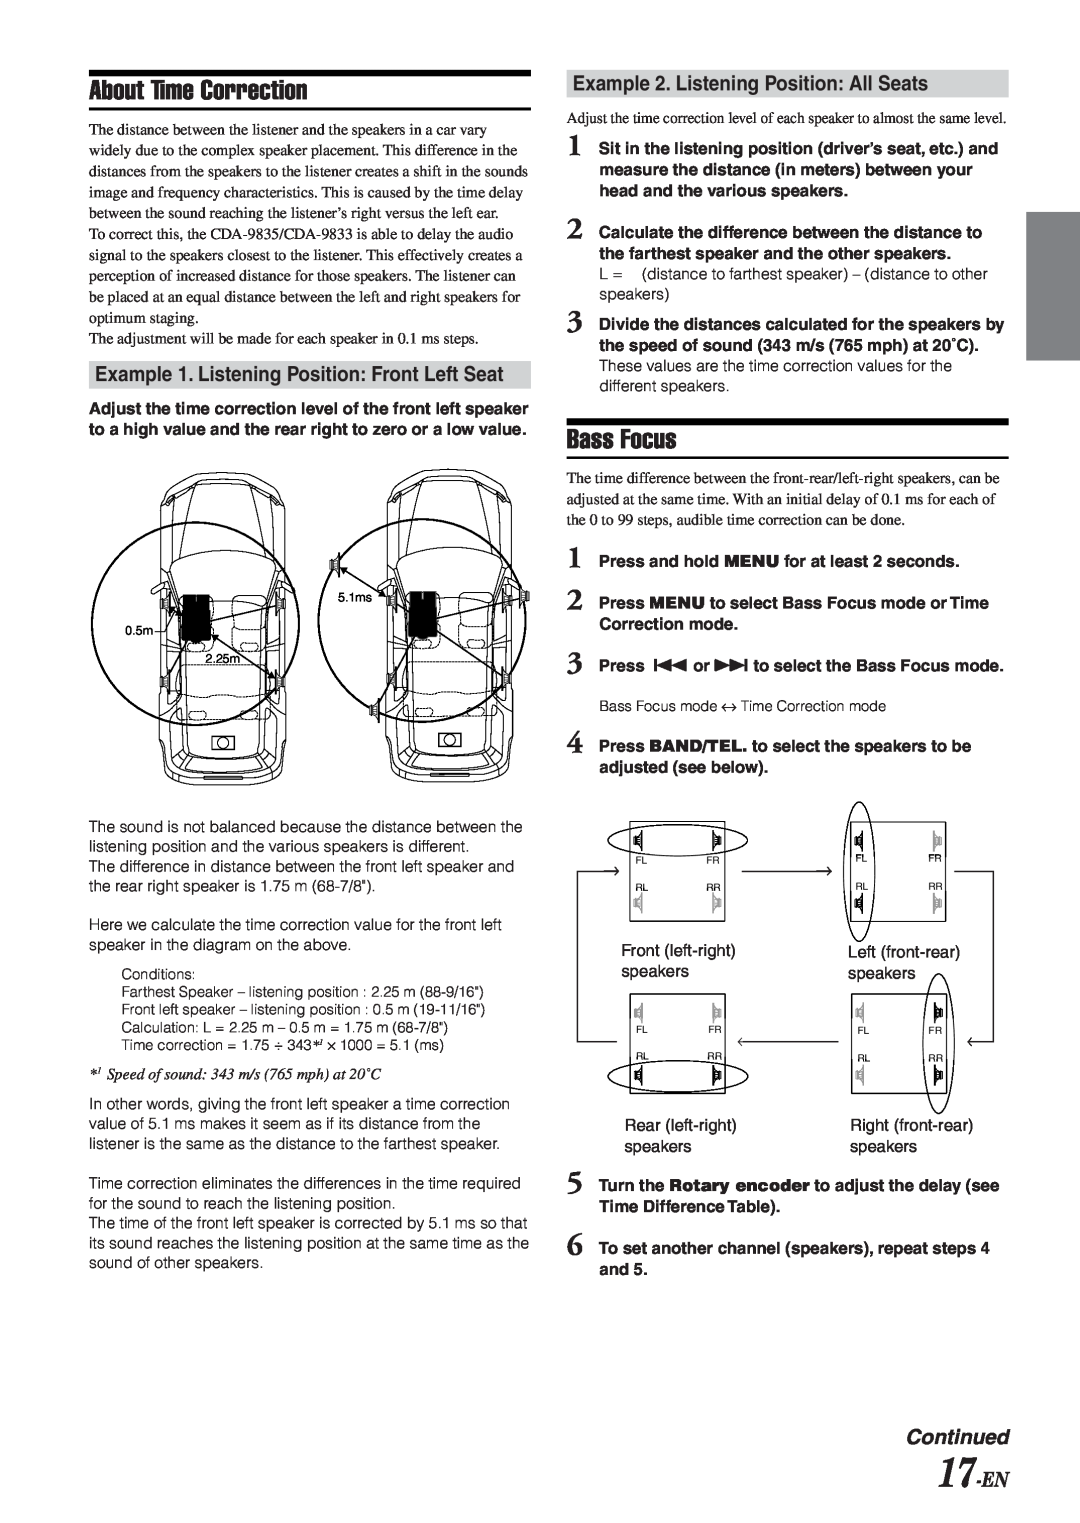 Alpine CDA-9833 owner manual About Time Correction, Bass Focus, Example 1. Listening Position Front Left Seat, 17-EN 